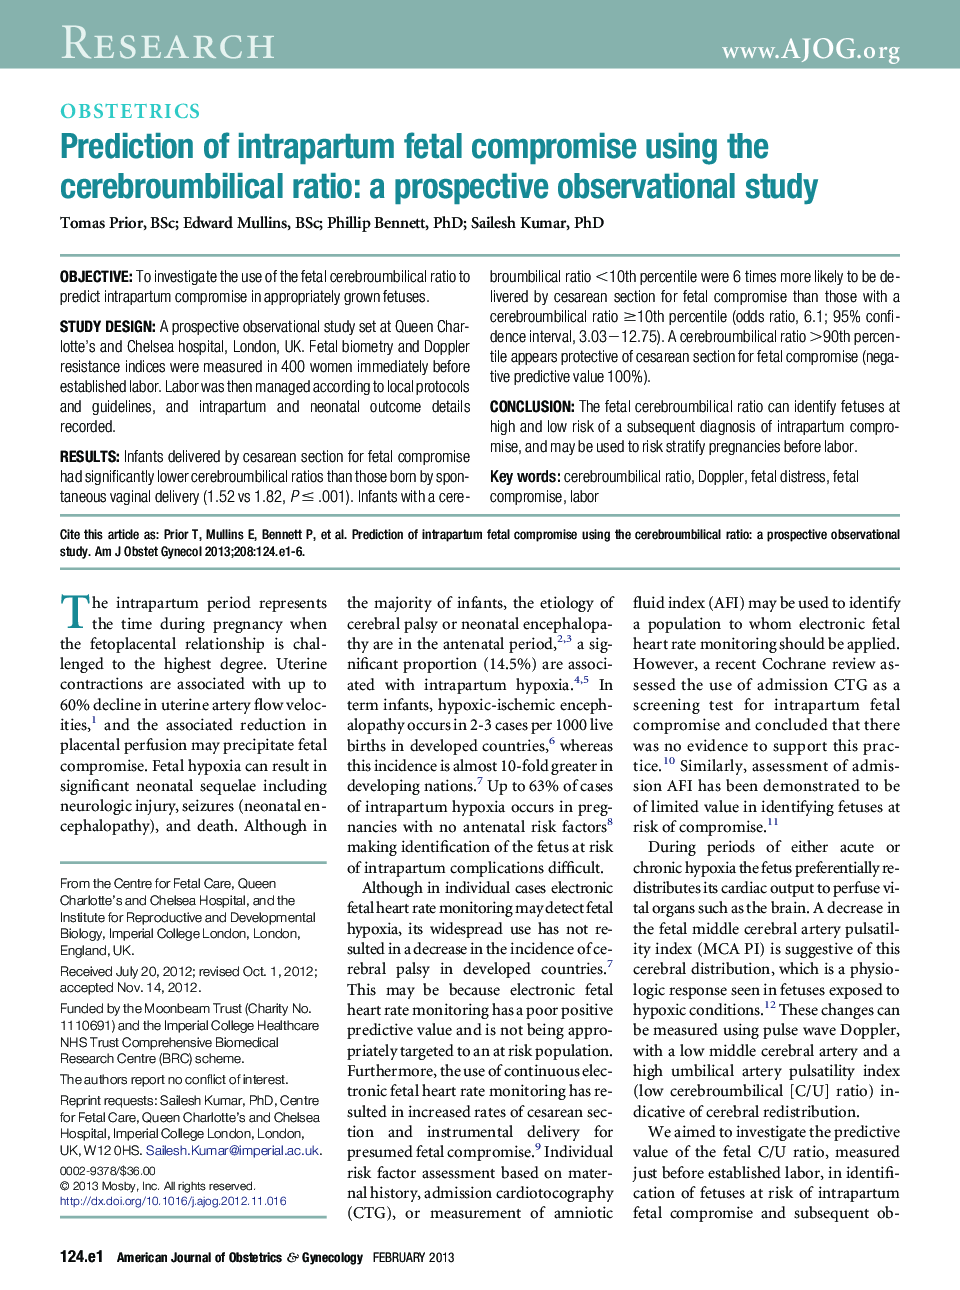 Prediction of intrapartum fetal compromise using the cerebroumbilical ratio: a prospective observational study